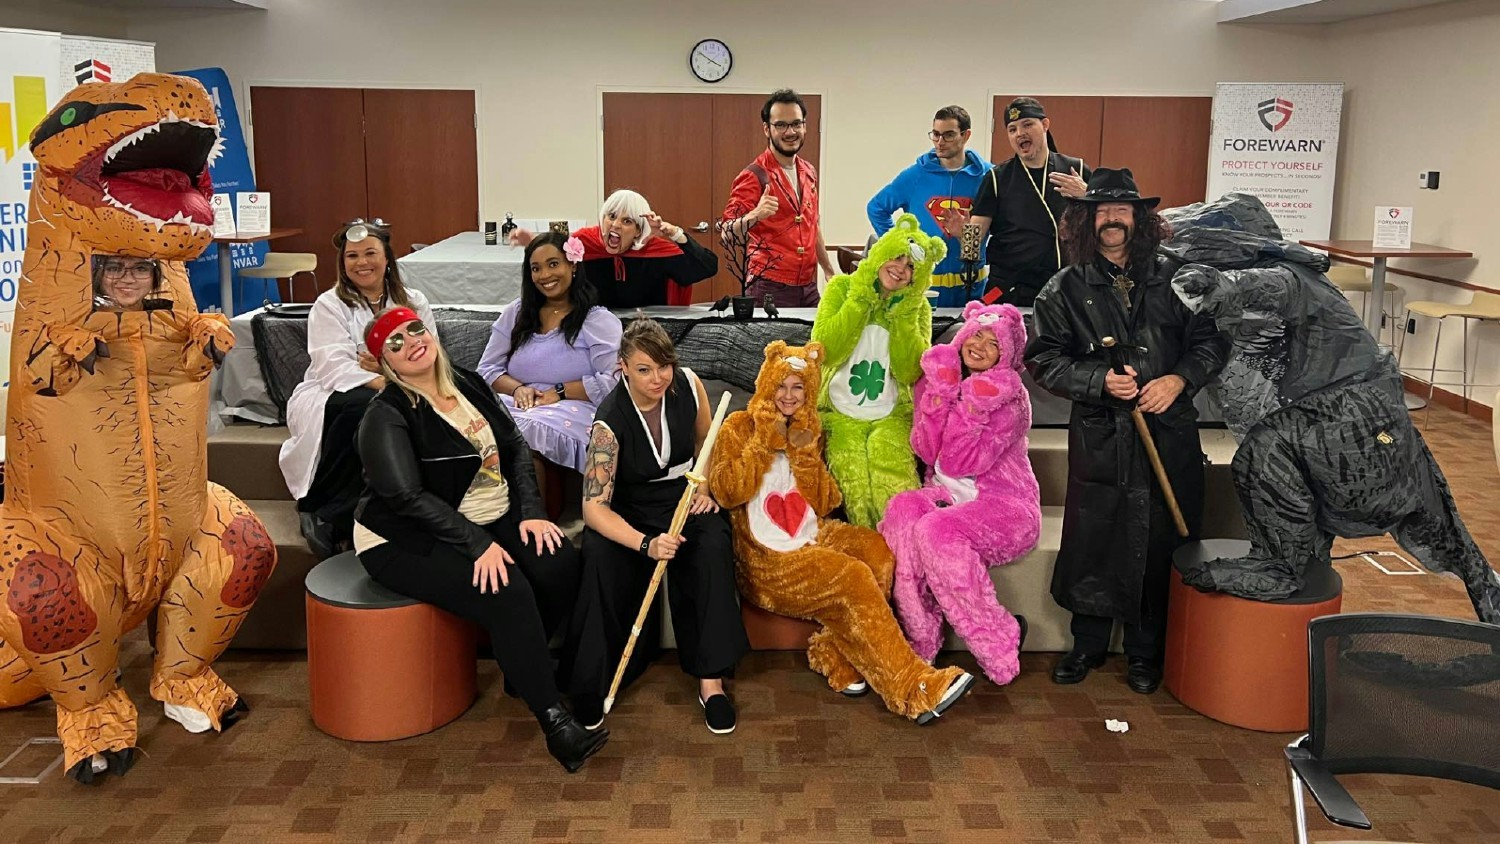 NVAR staff goes all out for Halloween! It's a day filled with laughter and creativity as the team celebrates together.